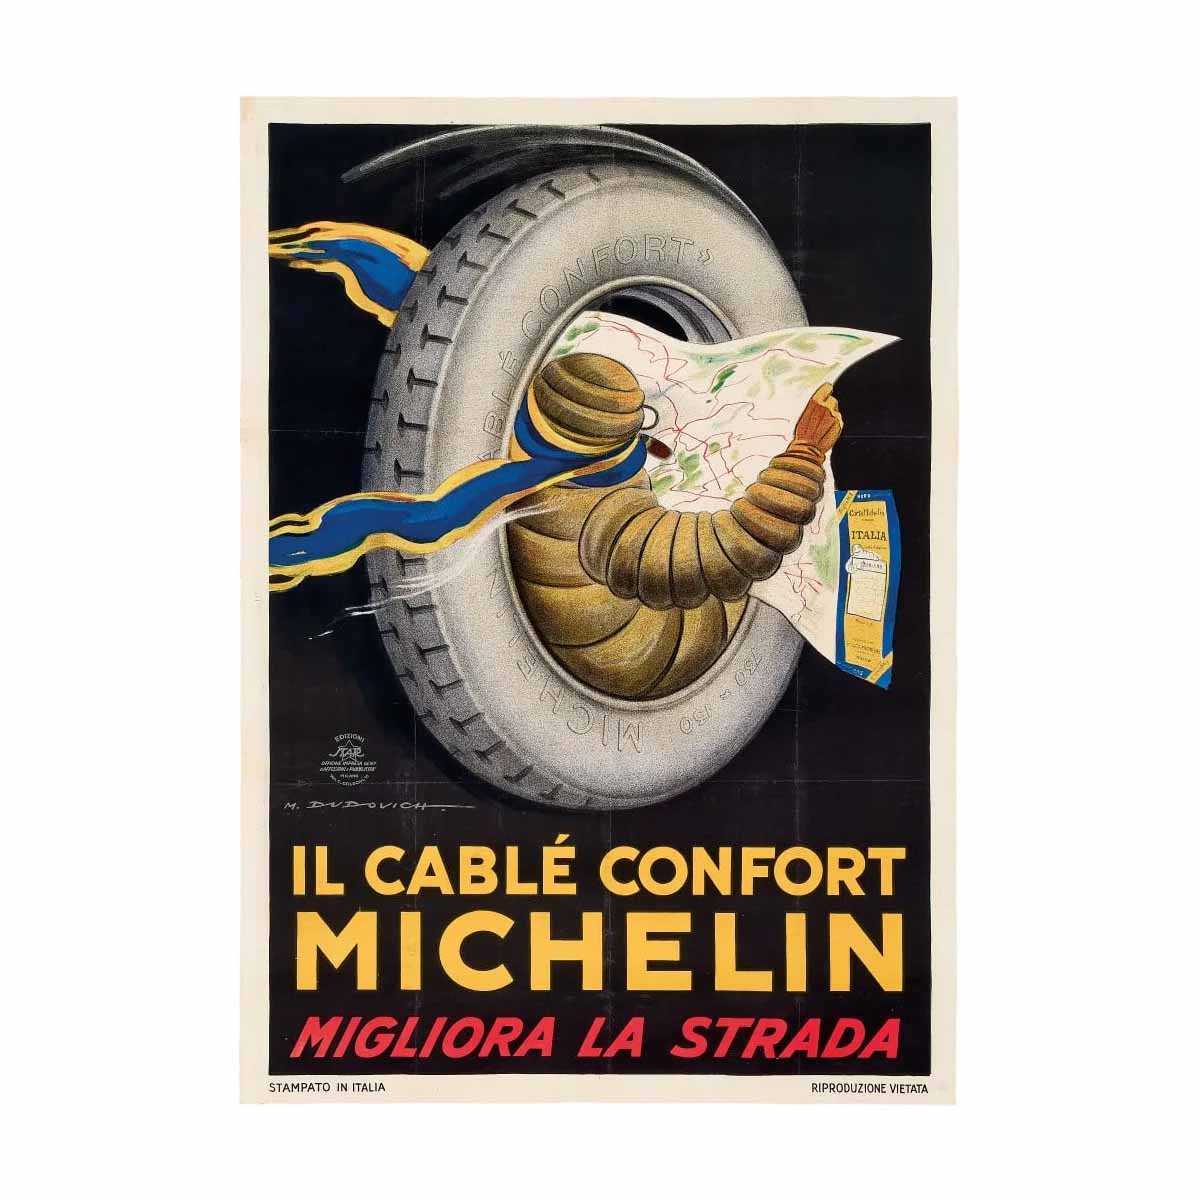 Italian-market Michelin poster from 1925, sold for €80,000 ($87,040, or $113,115 with buyer’s premium) at Aste Bolaffi April 16.